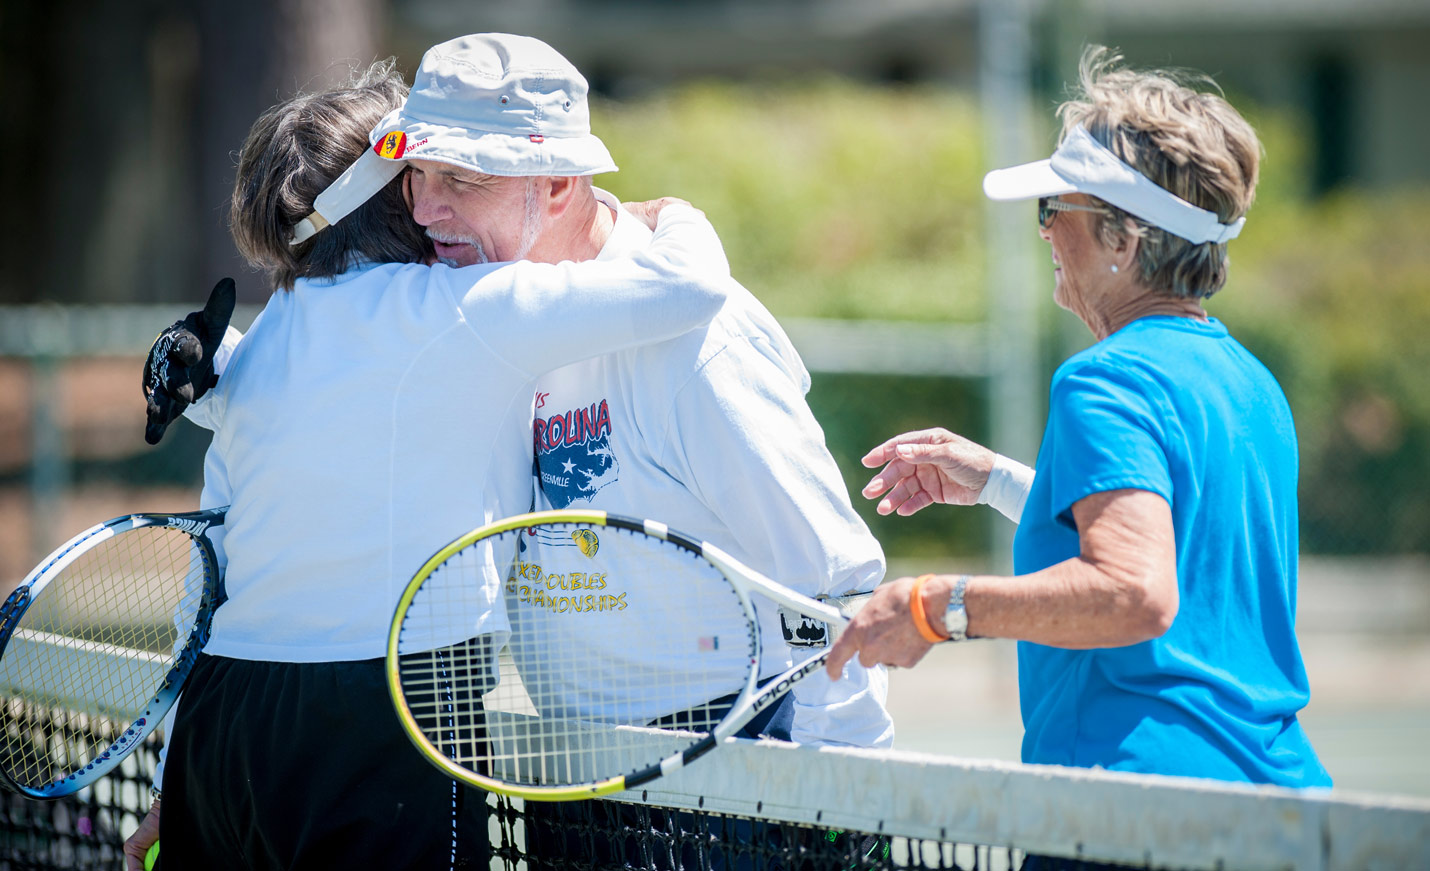 Two older adults hug over a tennis court net after a game.